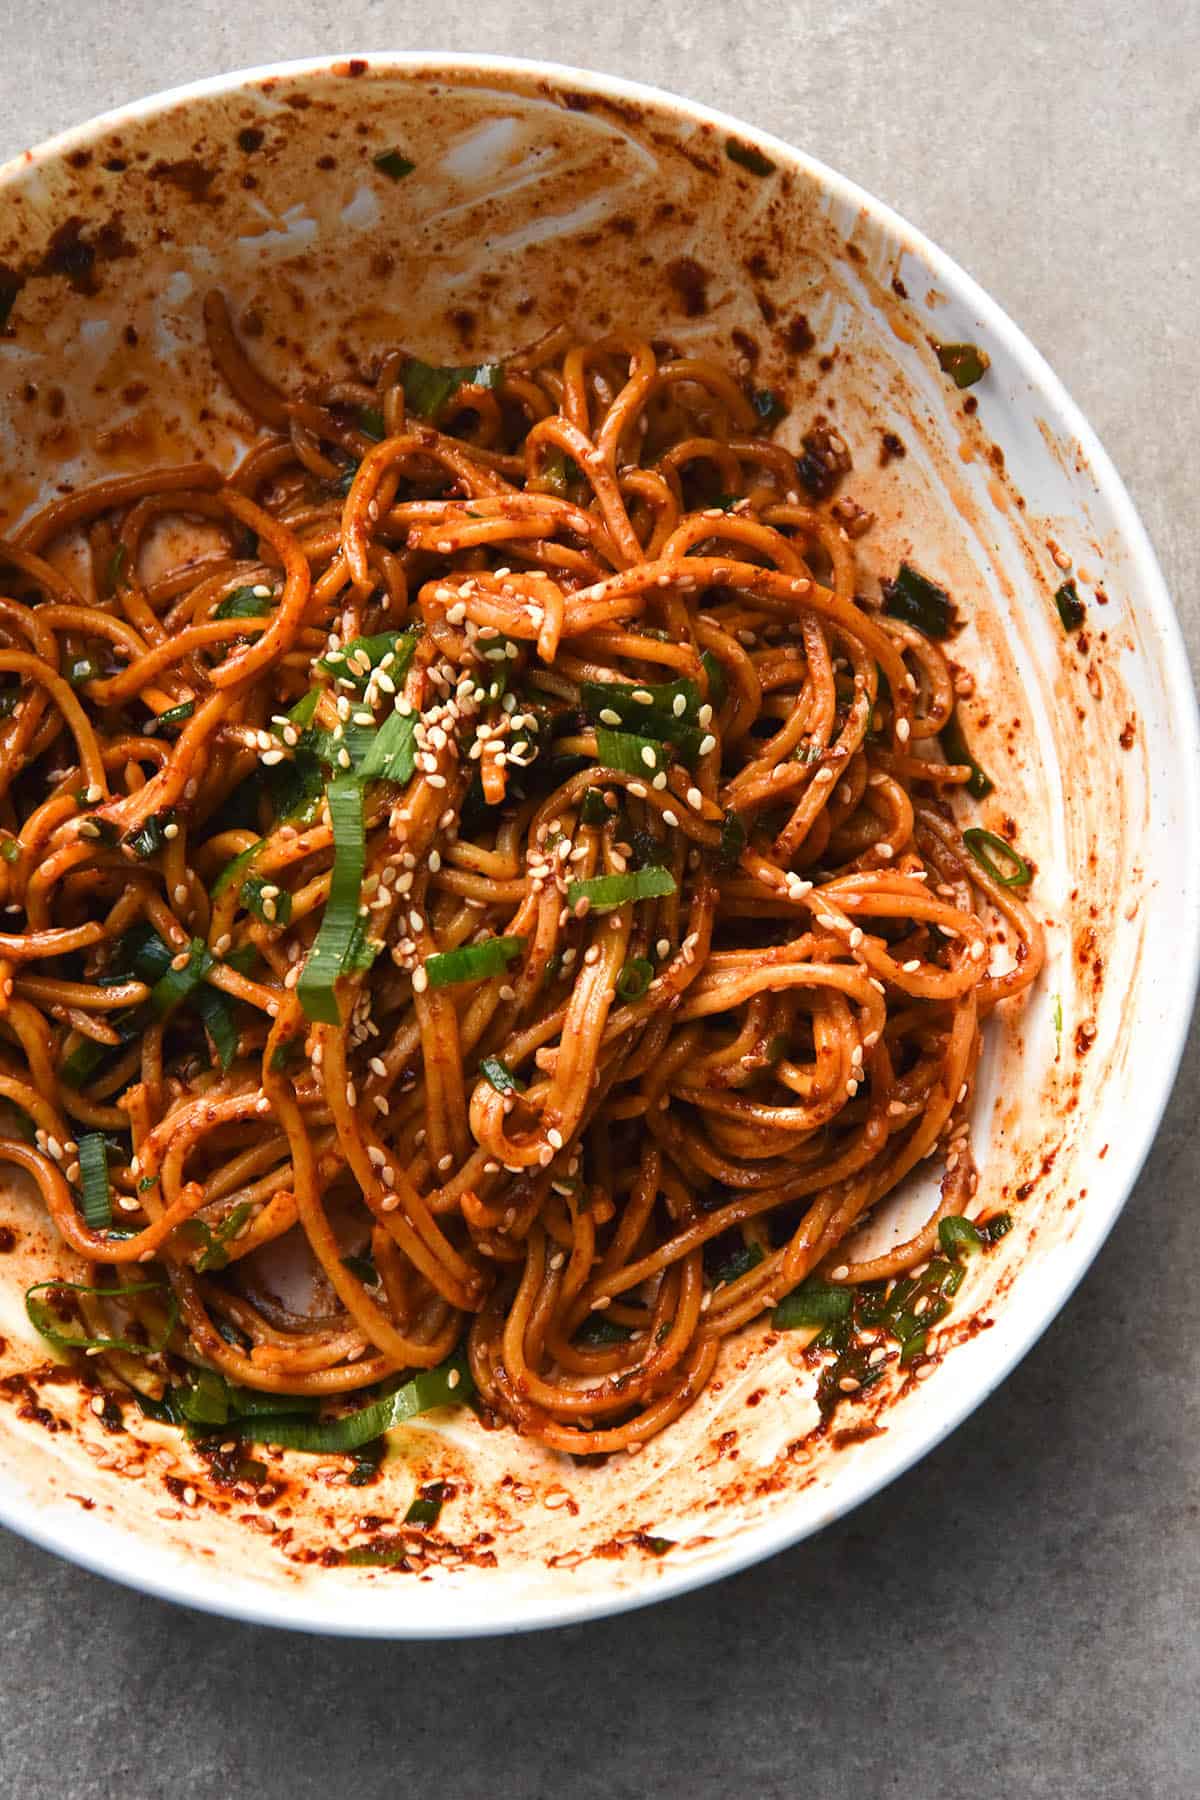 A close up, aerial view of a messy plate of FODMAP friendly chilli oil noodles. The noodles are casually strewn in the white bowl and their red hue contrasts with the spring onion greens and sesame seeds that garnish them. The bowl sits atop a light grey slate tile.